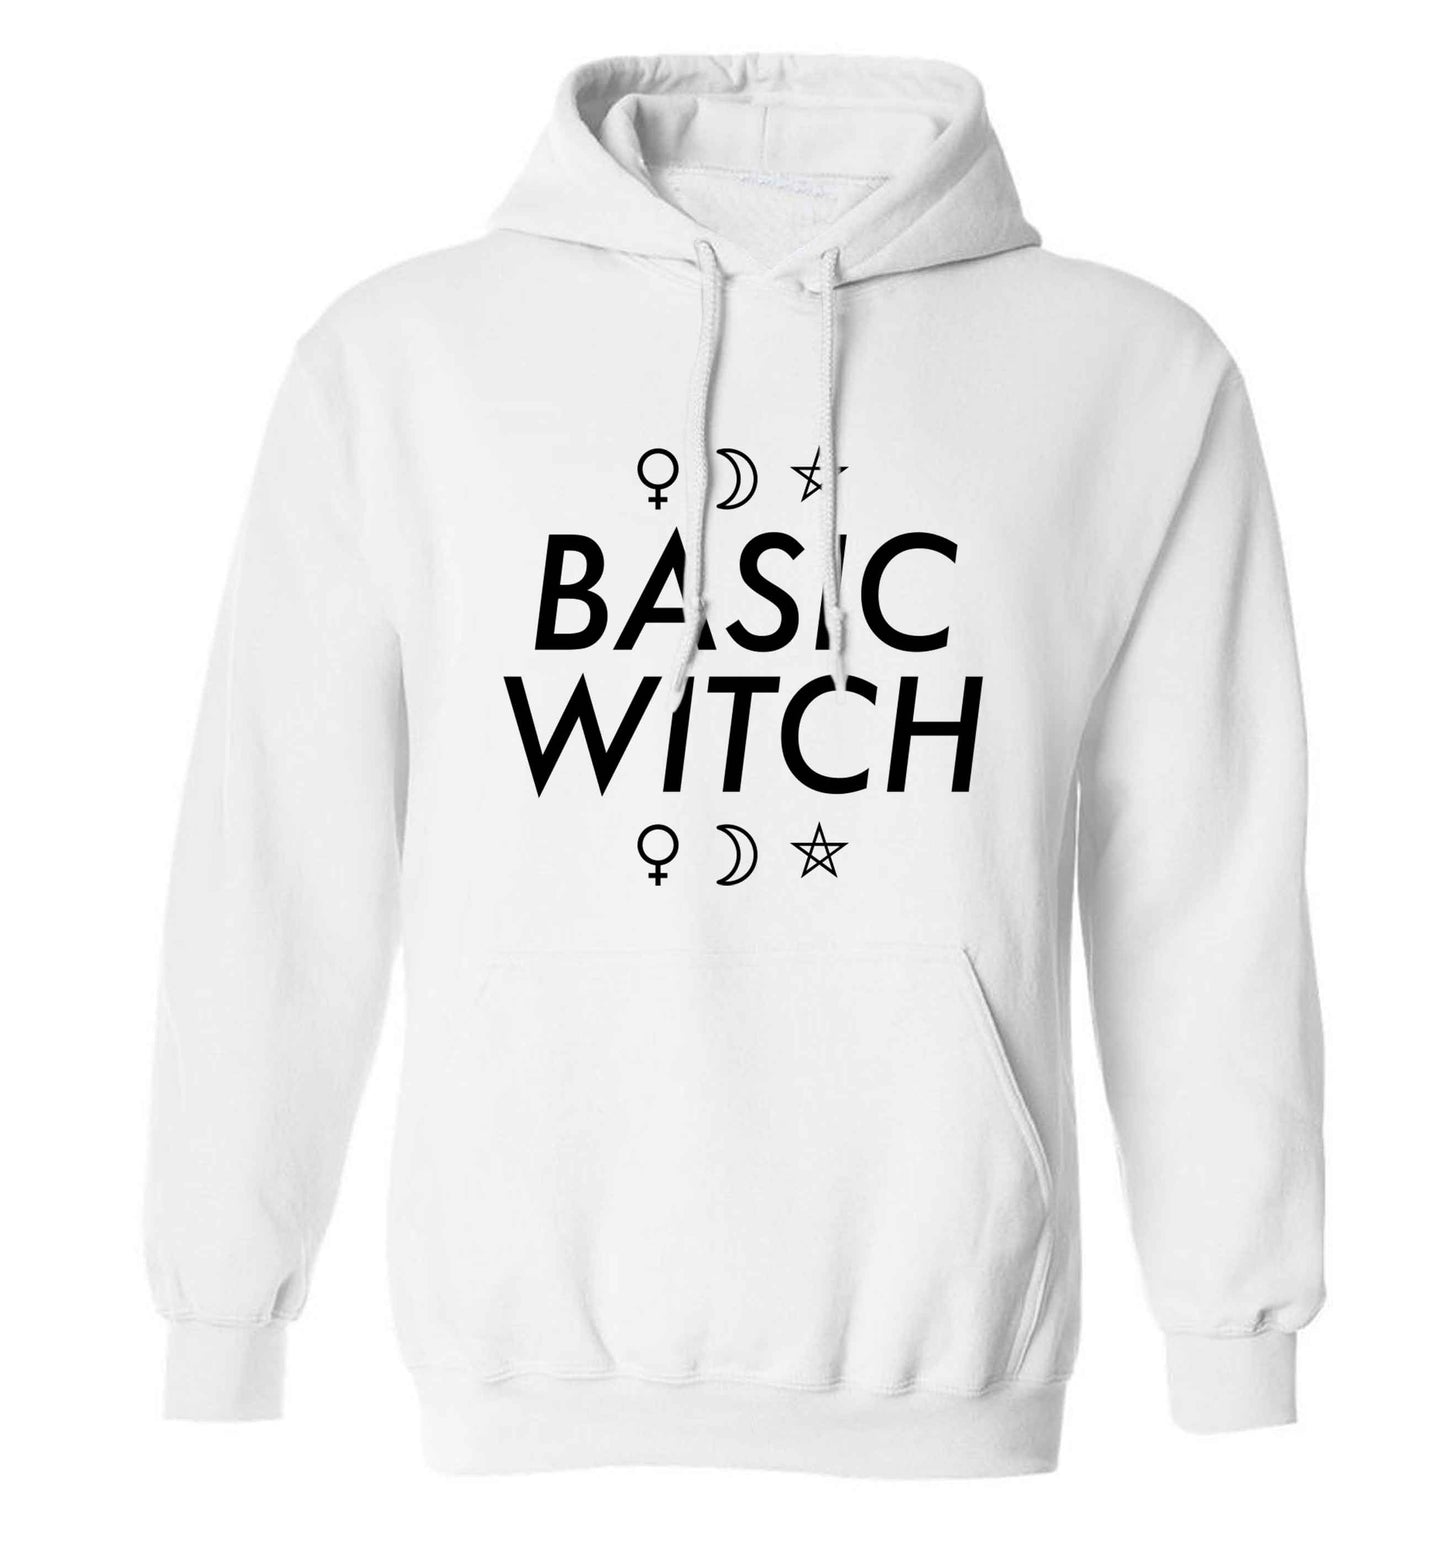 Basic witch 1 adults unisex white hoodie 2XL